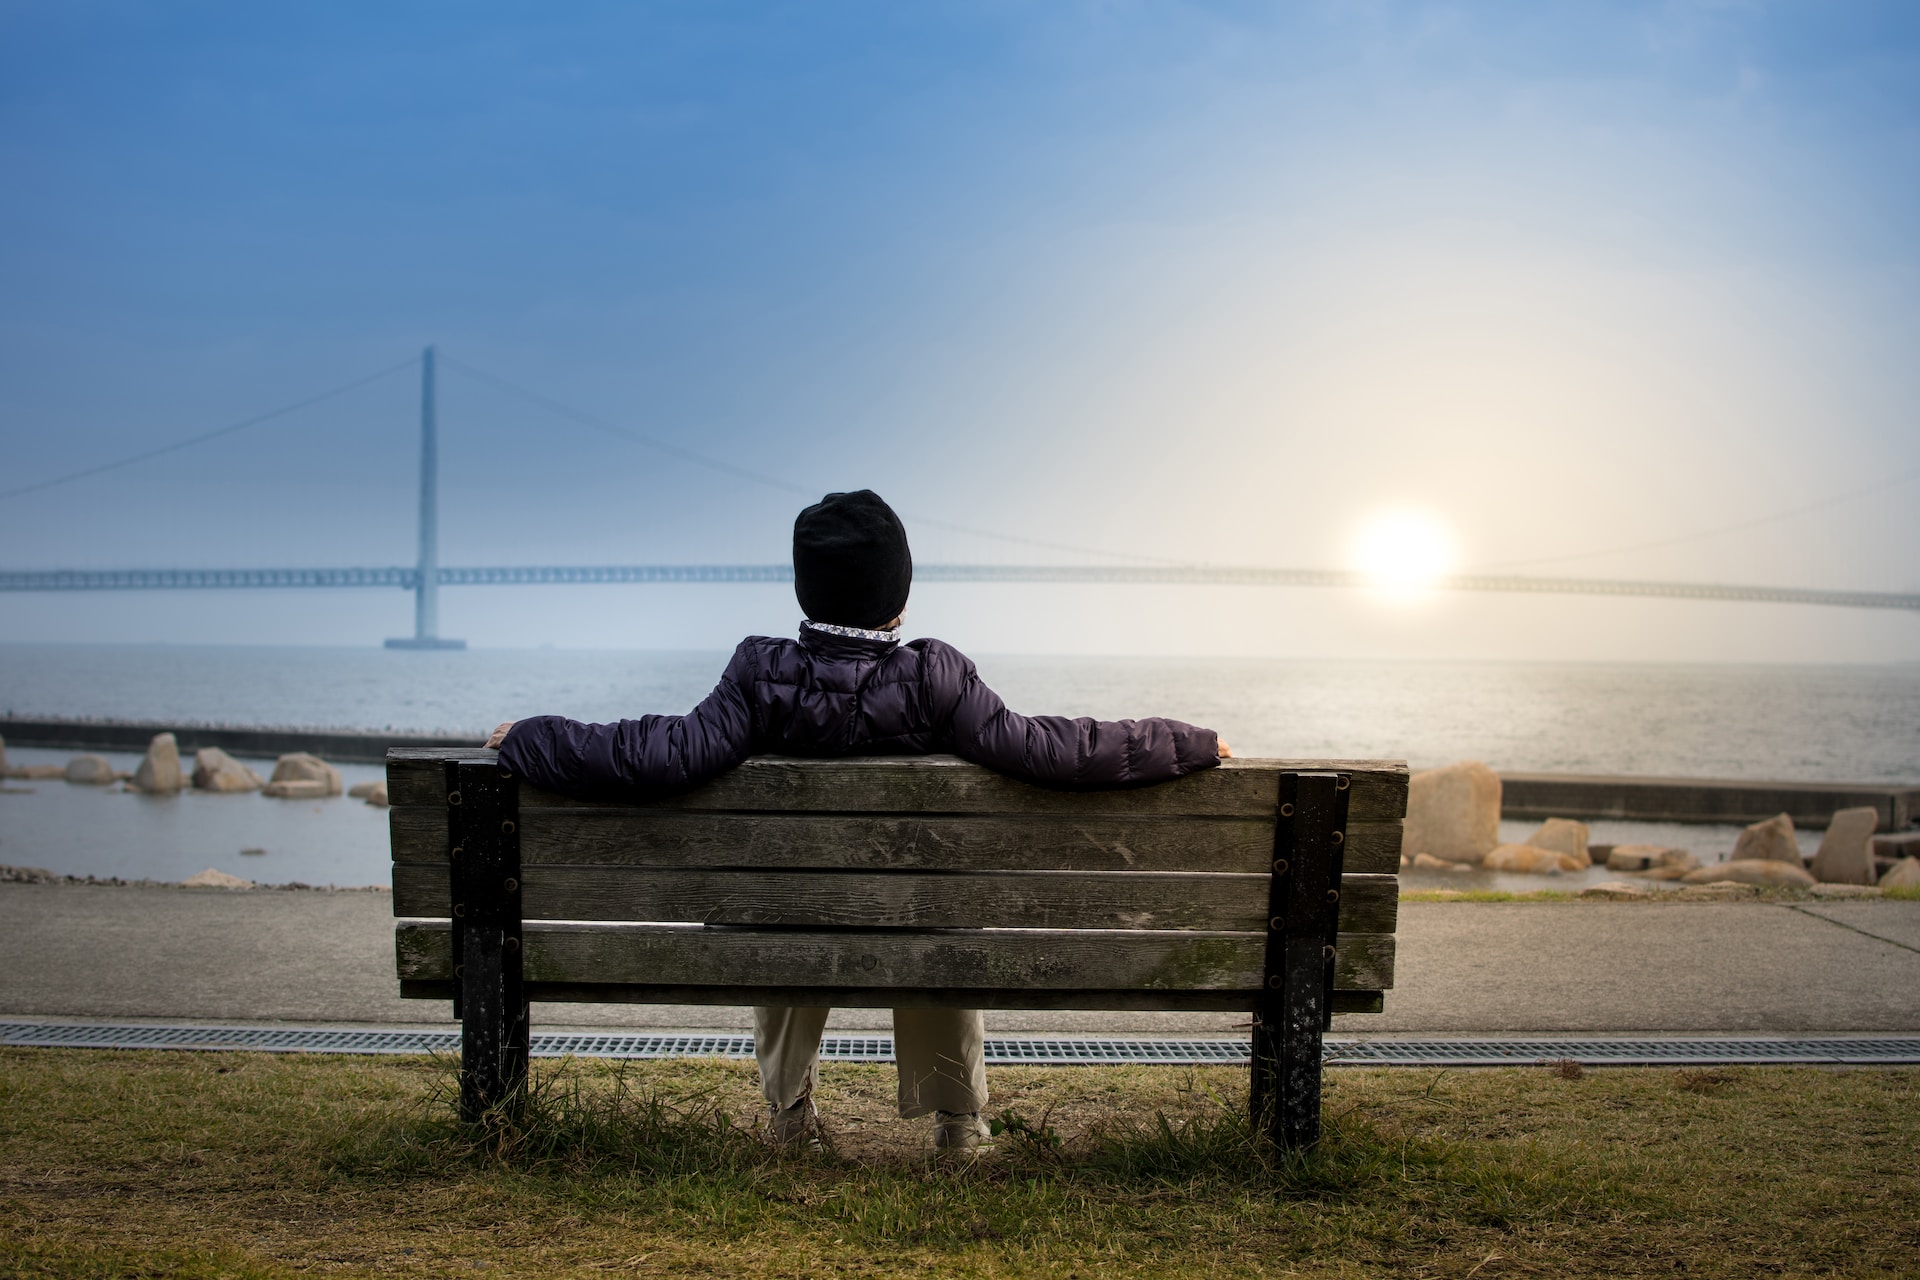 A man resting on a bench during the sunset.